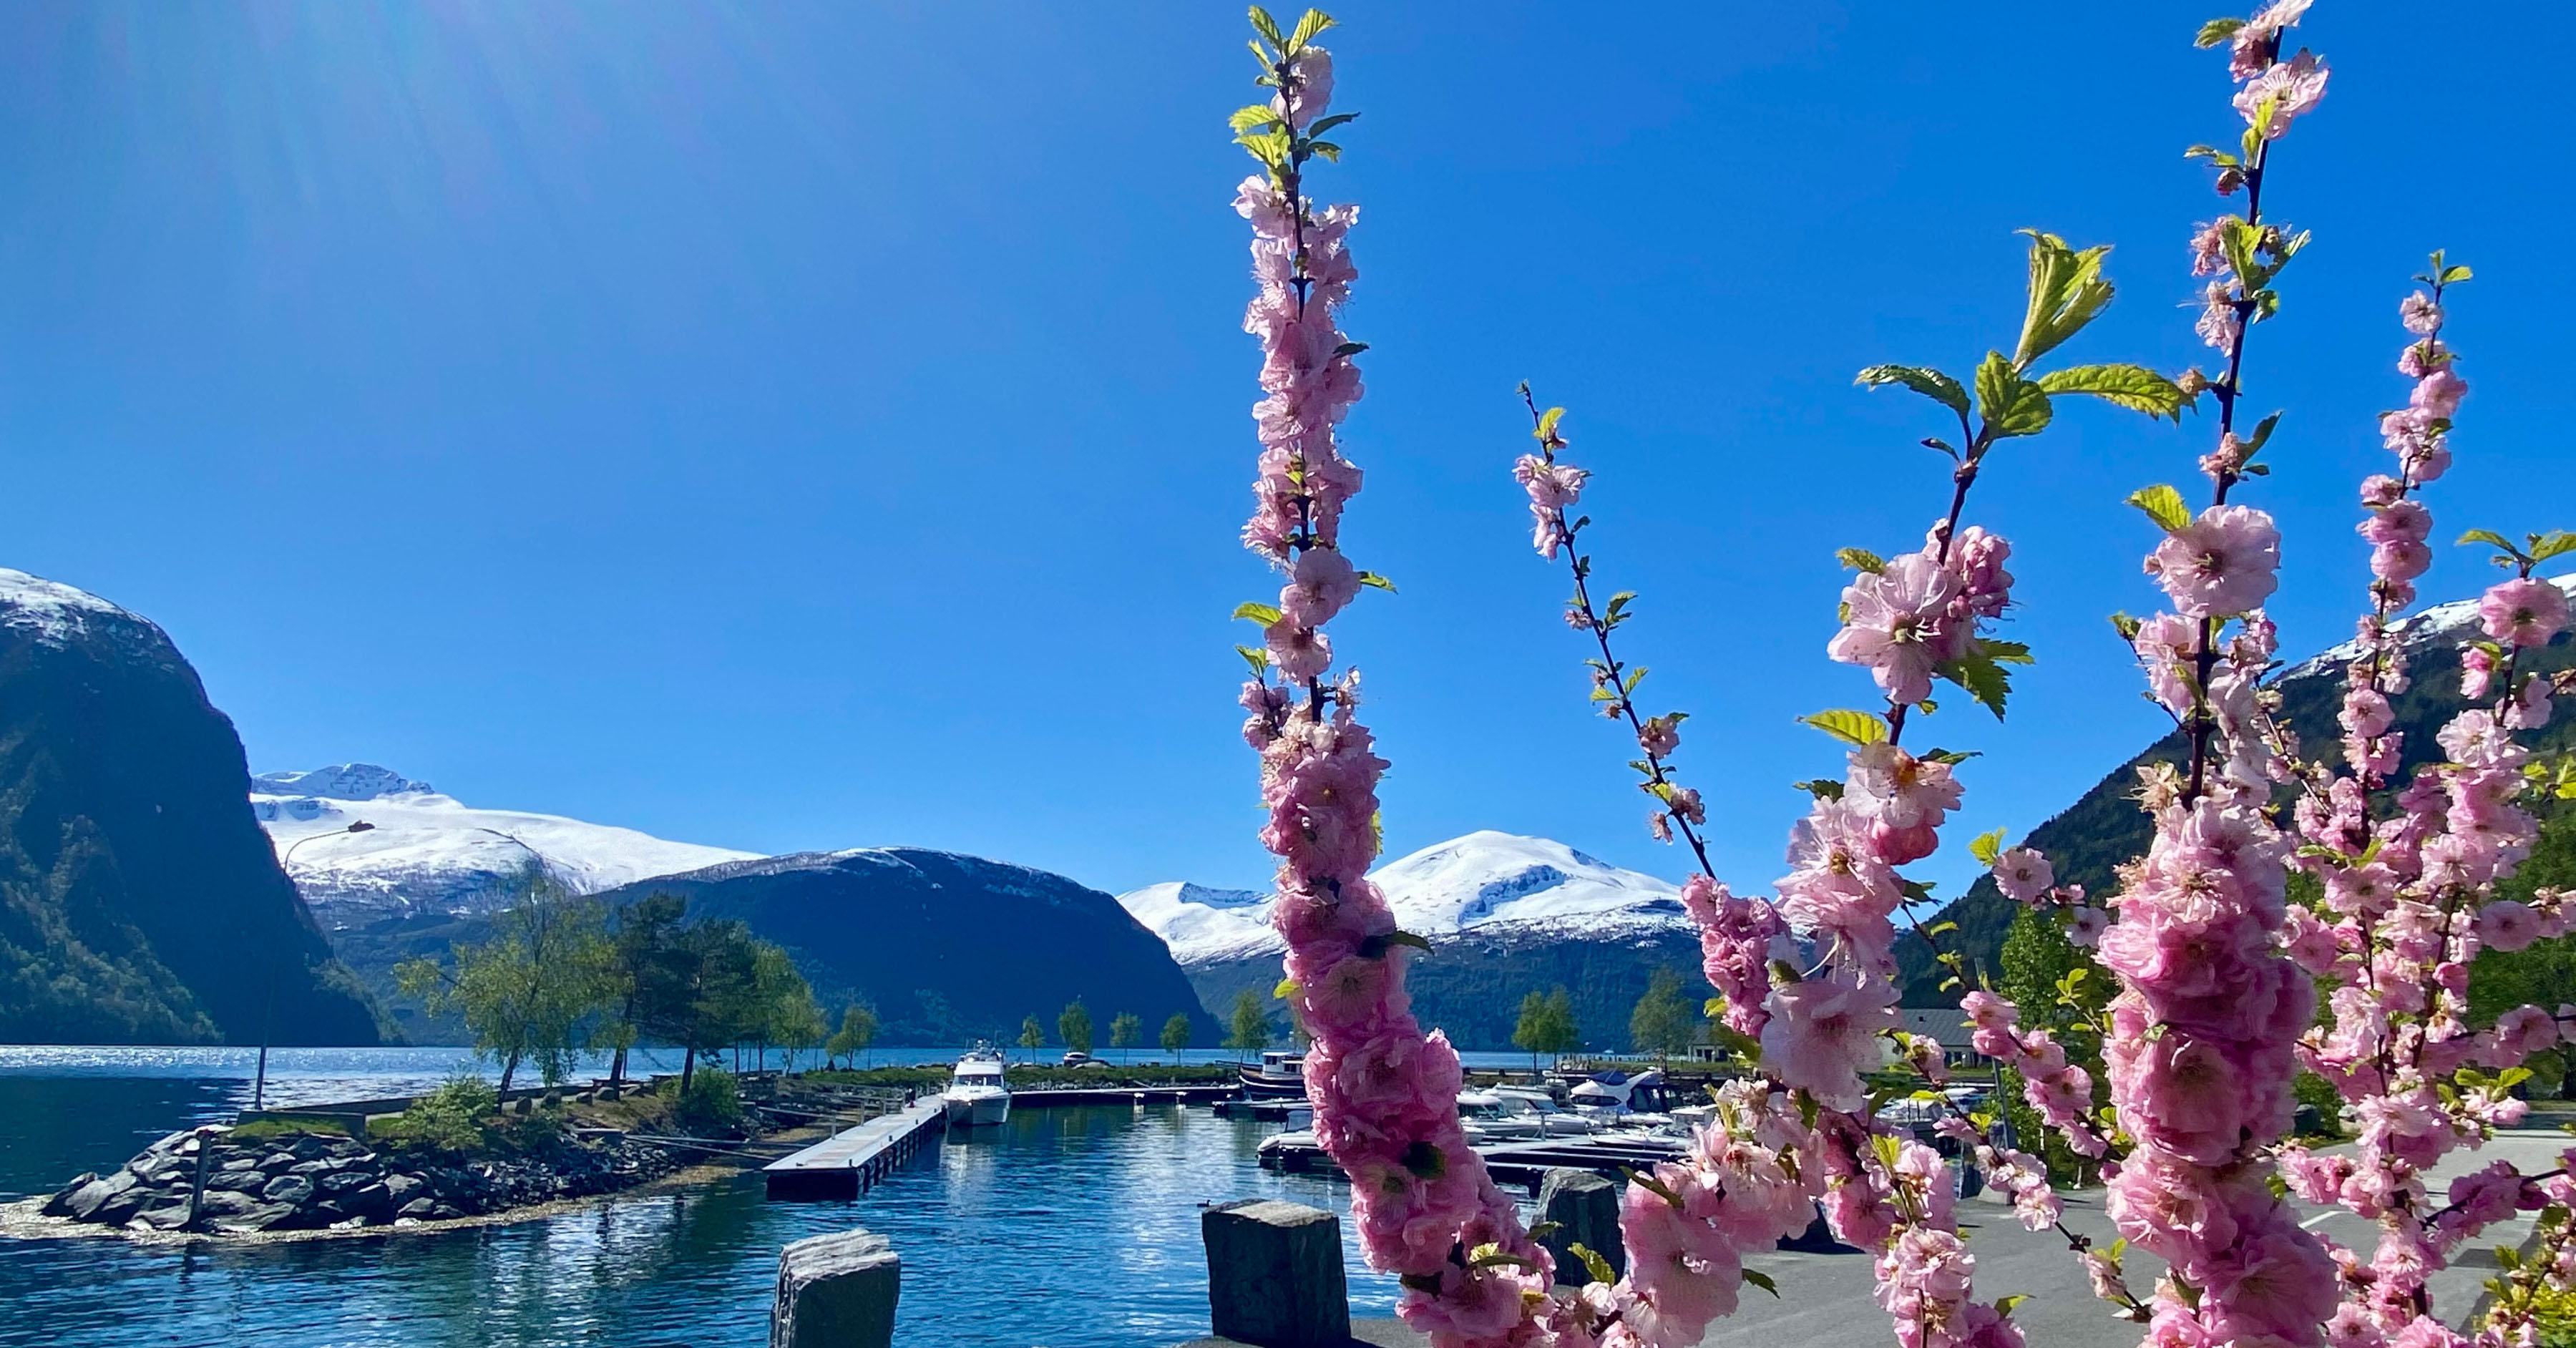 Fjord kommune has four beautiful seasons with great contrasts. Spring offers fruit blooming and boating by the fjord, while winter has not completely let go of the mount